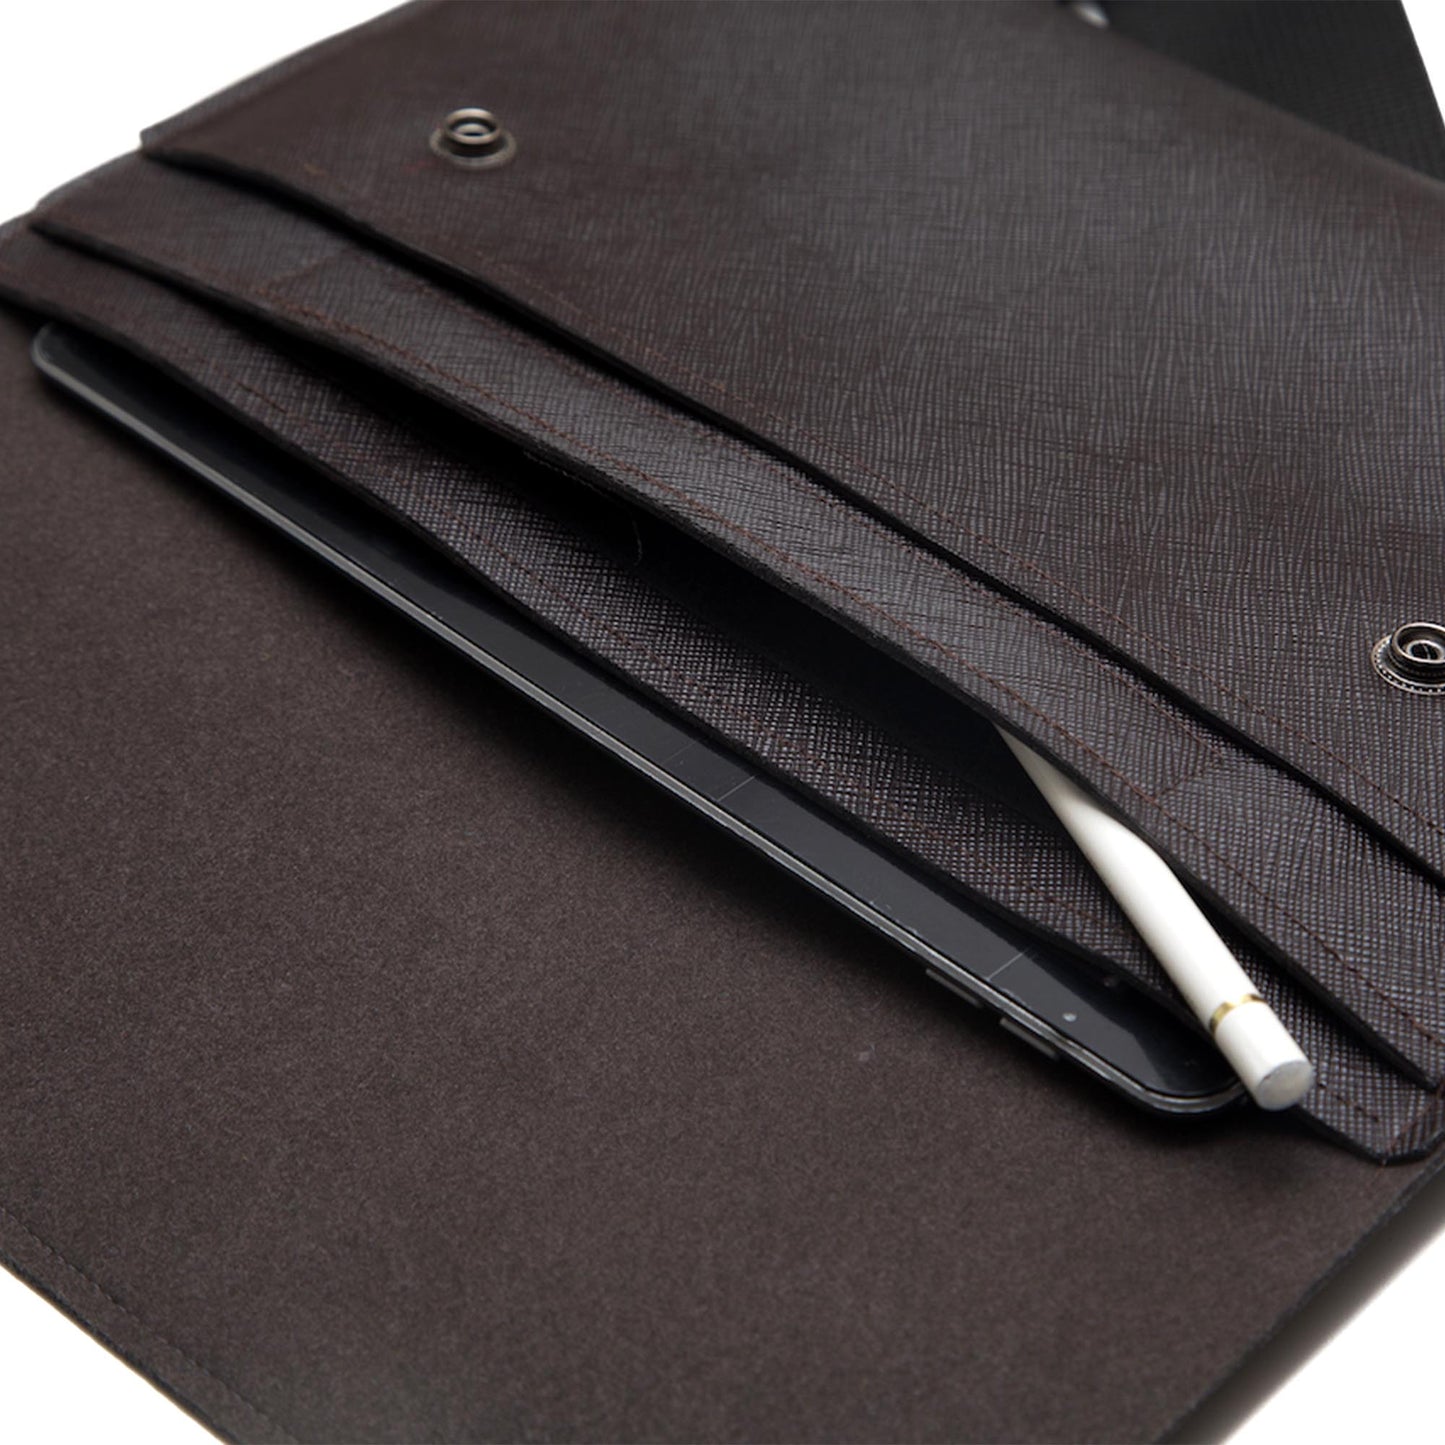 iPad Messenger Bag with Shoulder Strap - Brown Faux Leather